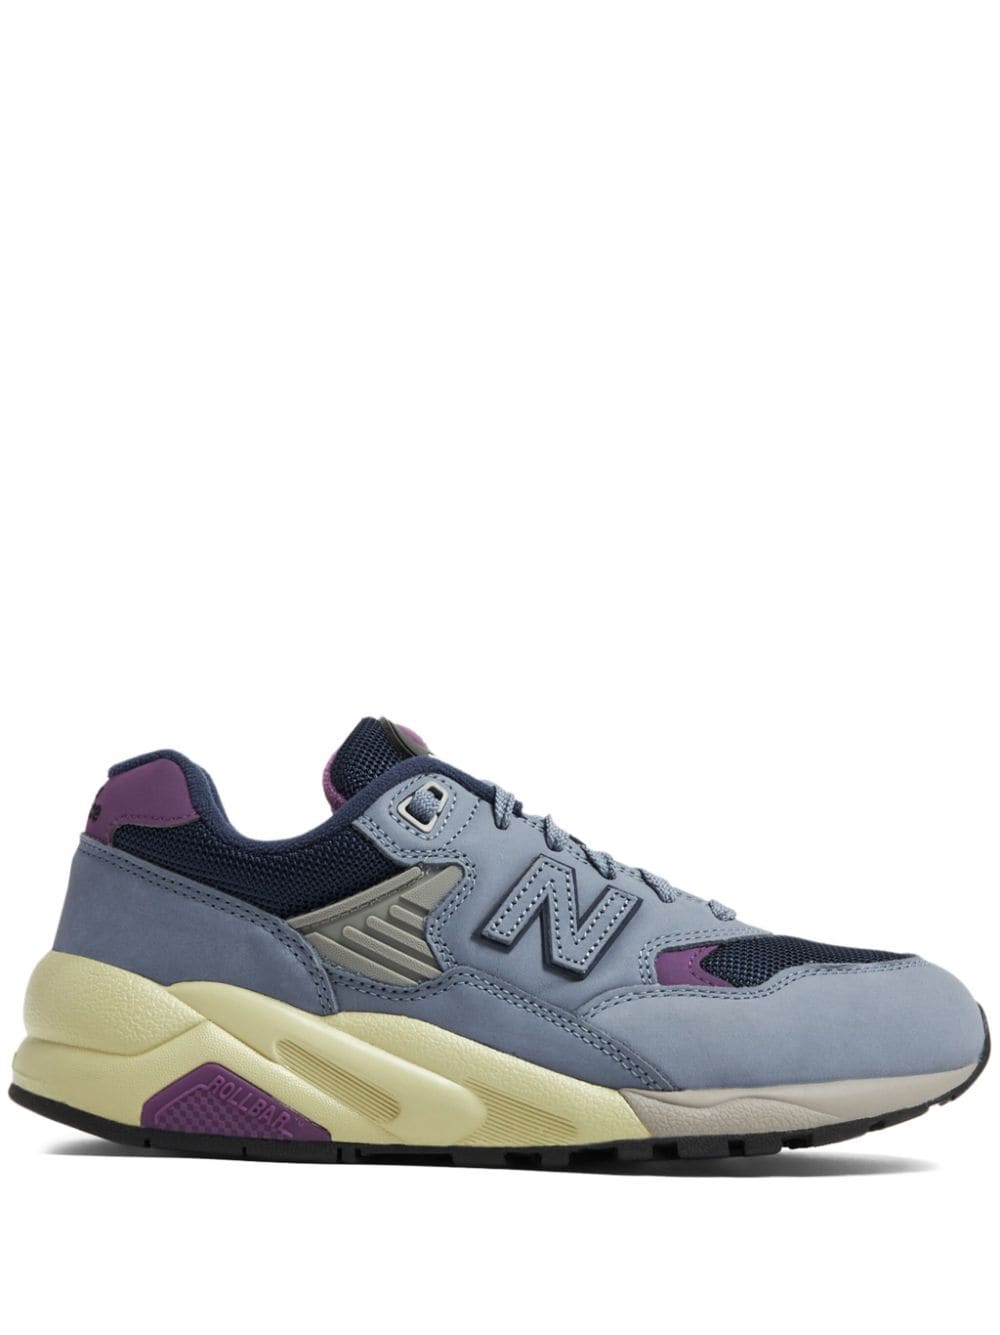 New Balance 580 suede sneakers - Blue